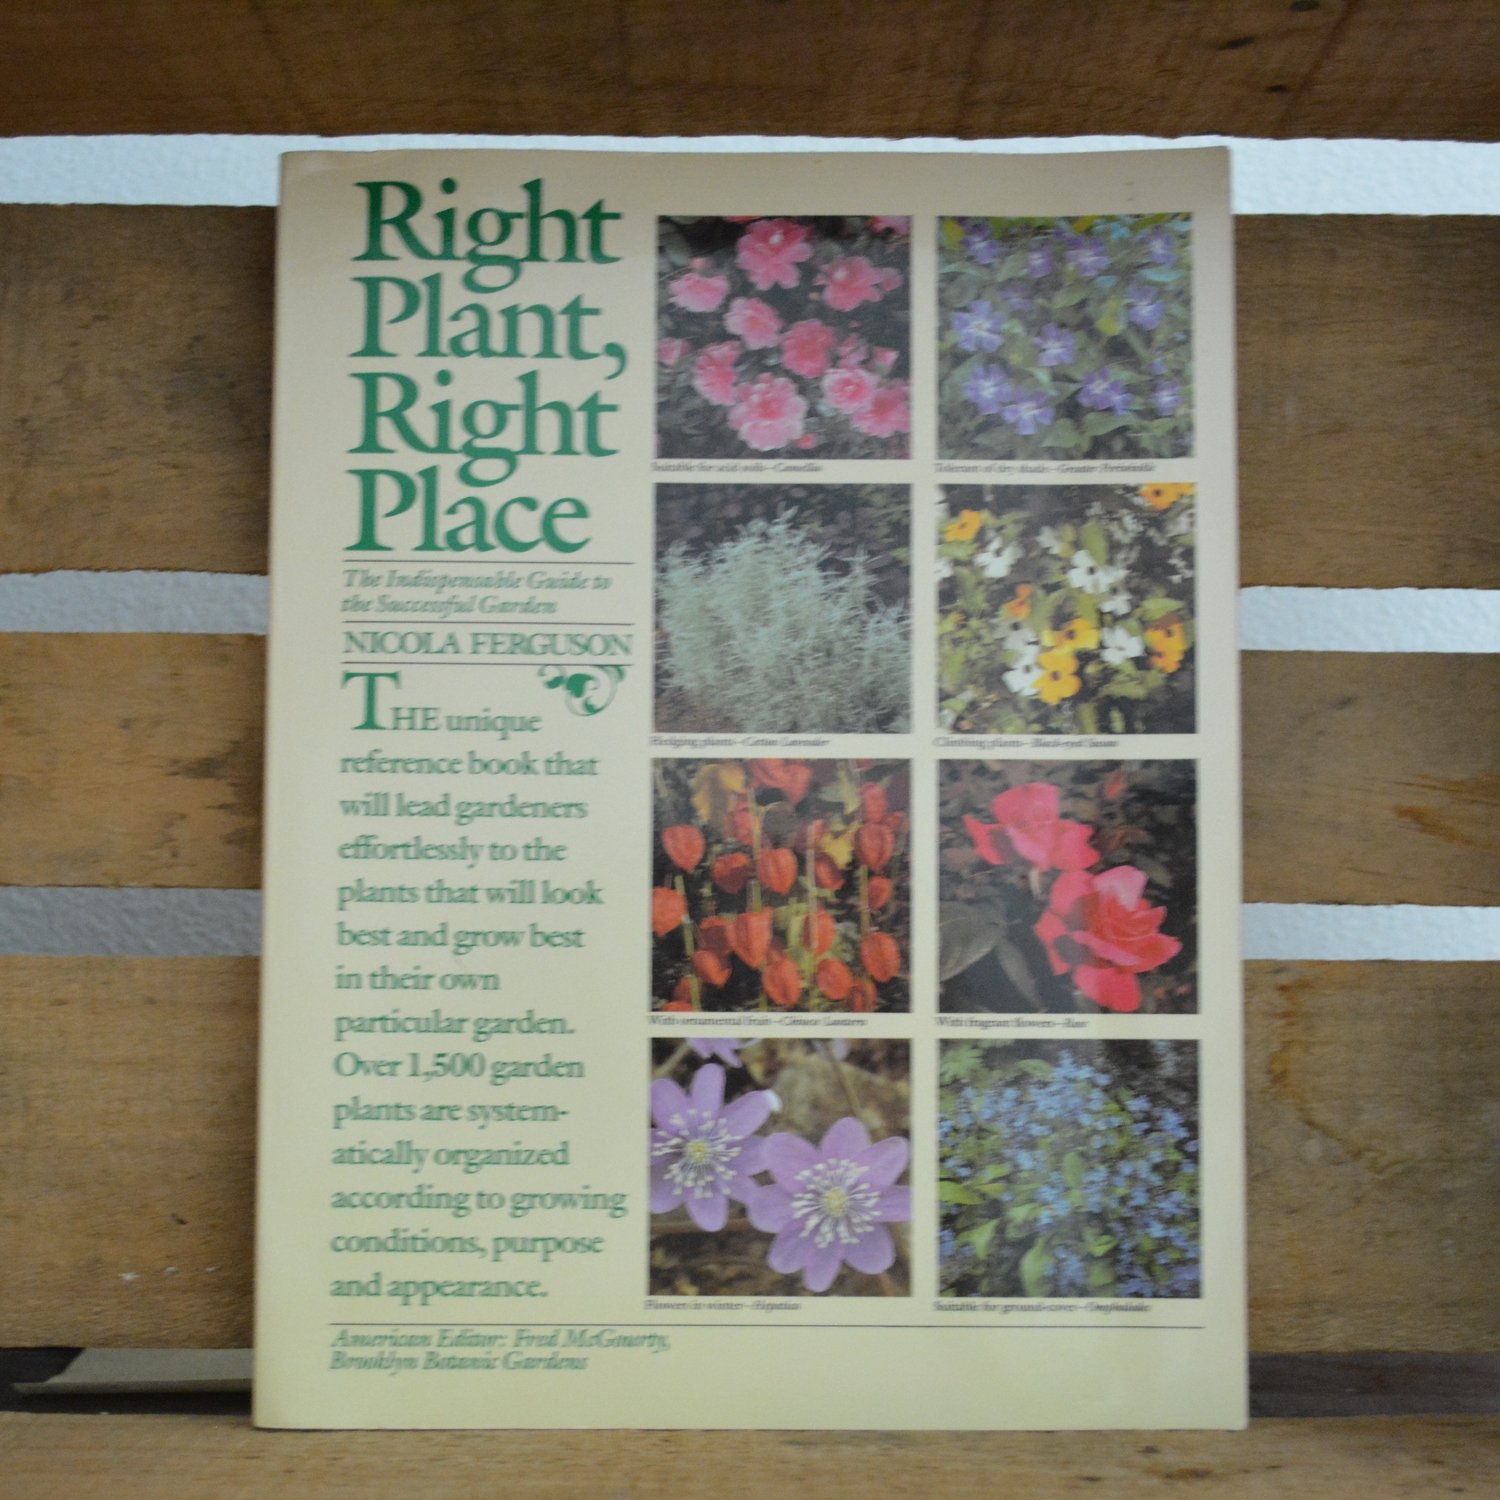 Right Plant Right Place by Nicola Ferguson